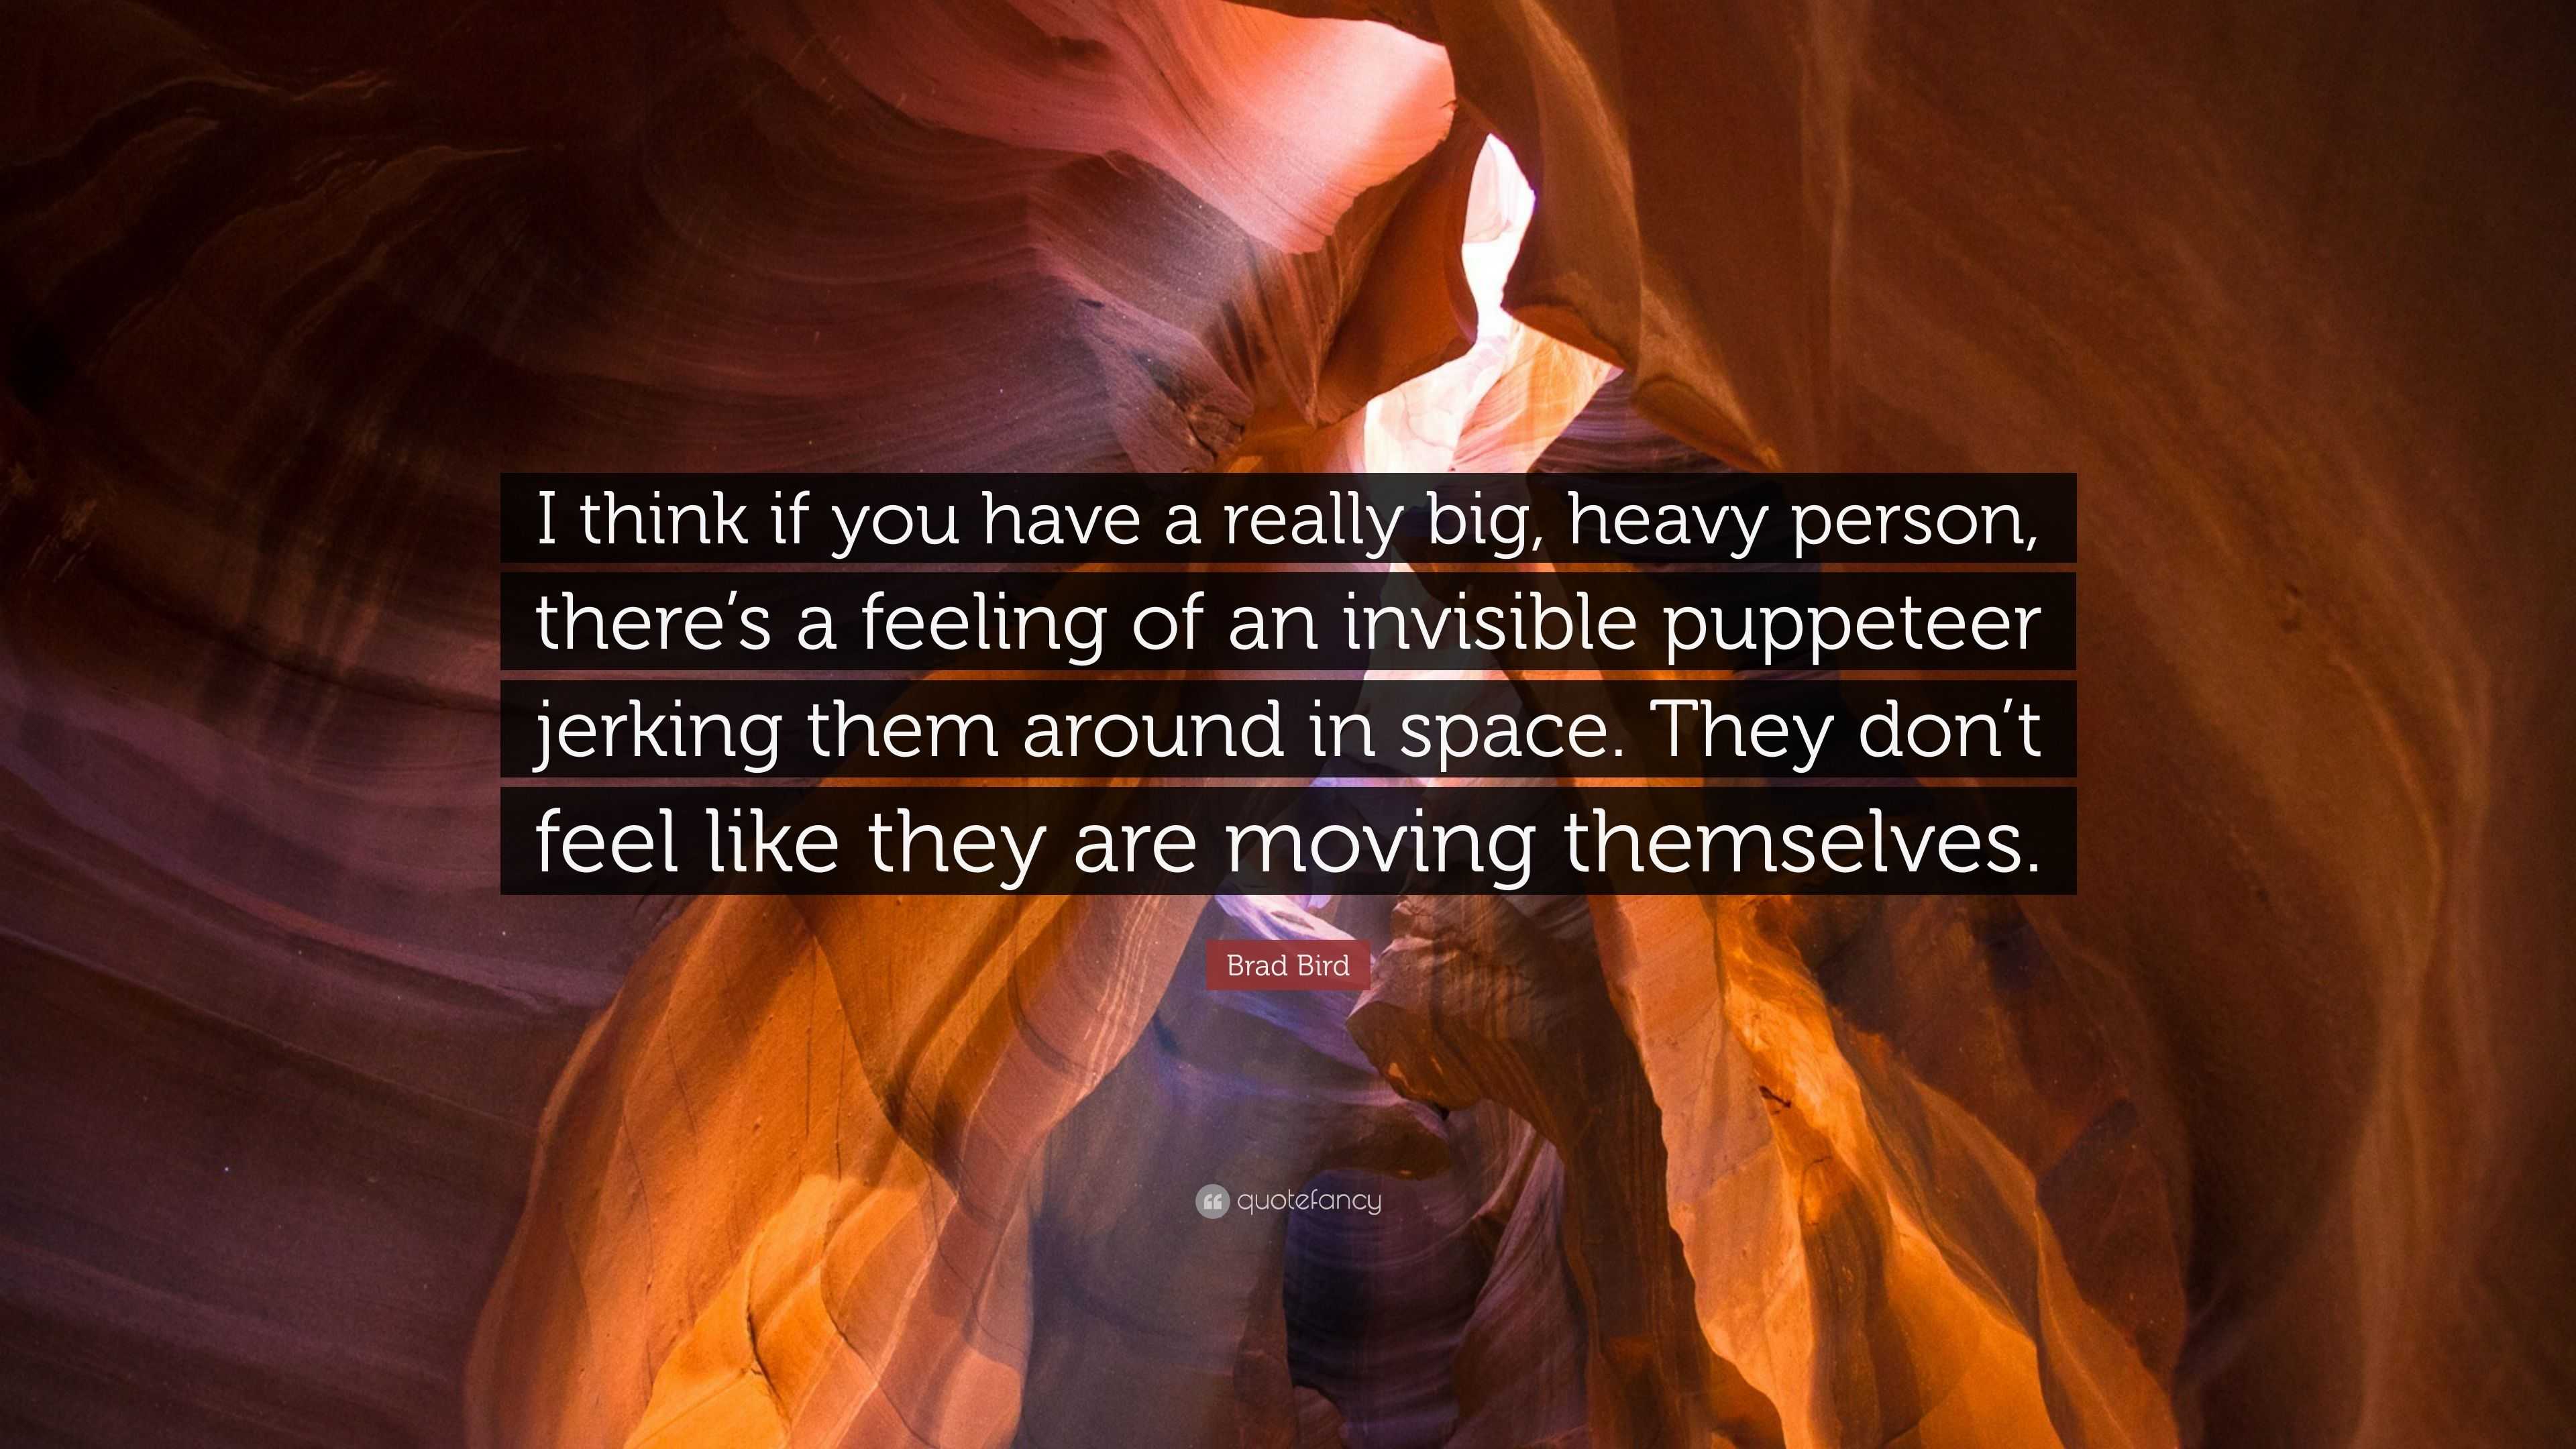 Brad Bird Quote: “I think if you have a really big, heavy person